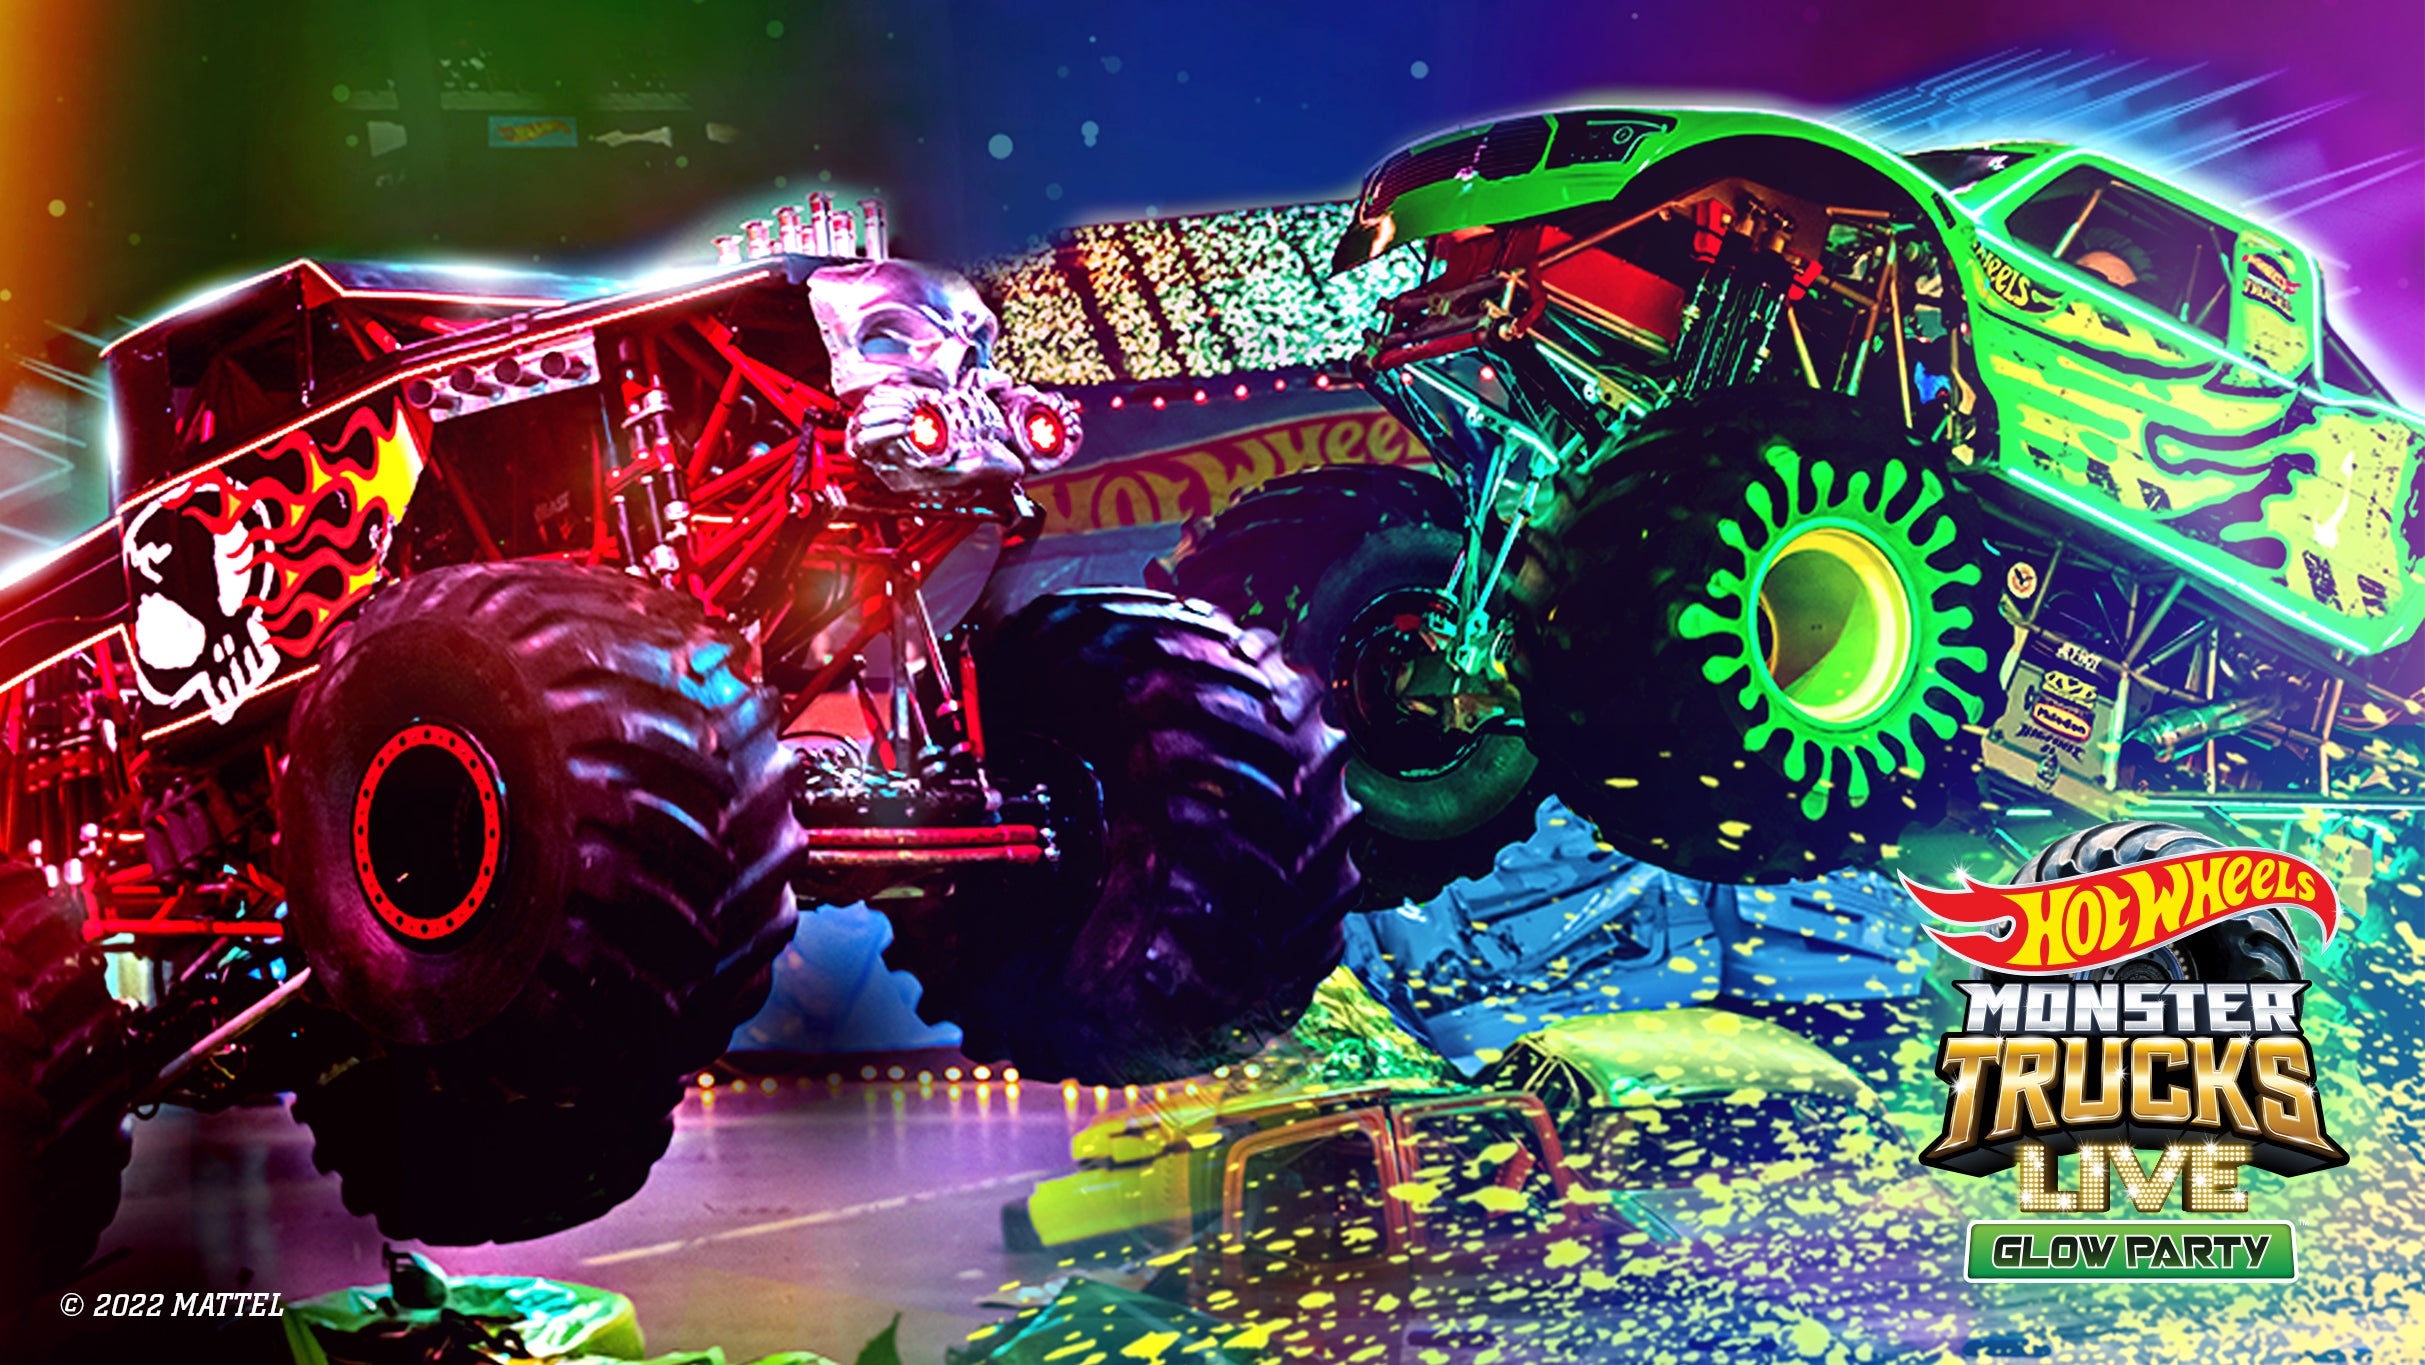 Hot Wheels Monster Trucks Live Glow Party The O2